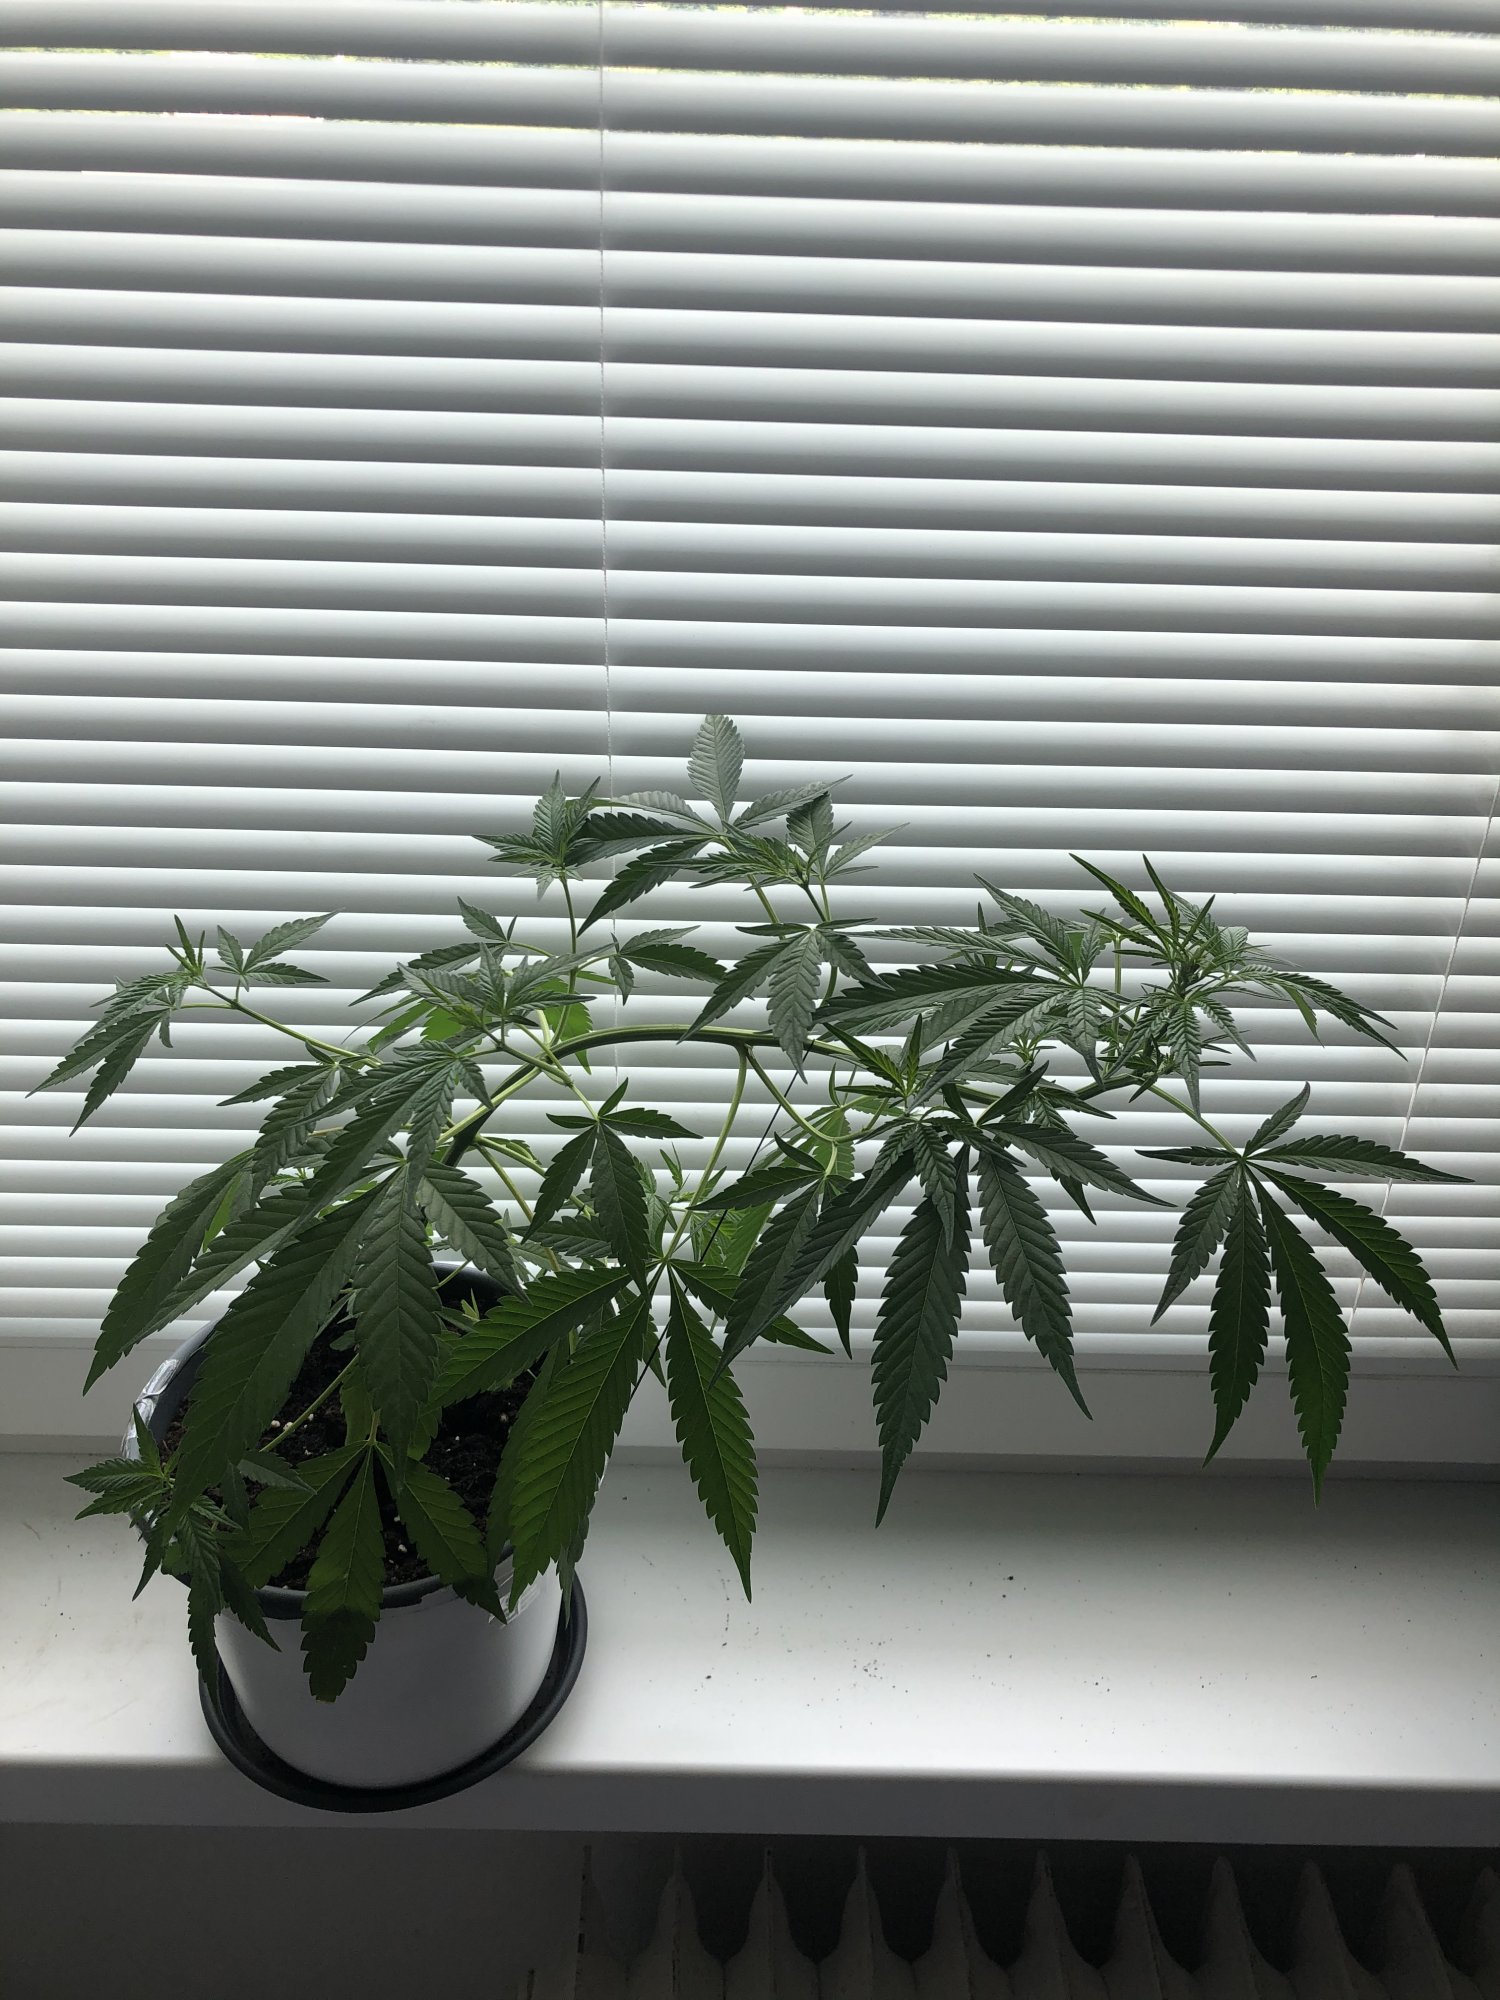 My first time grow question 2